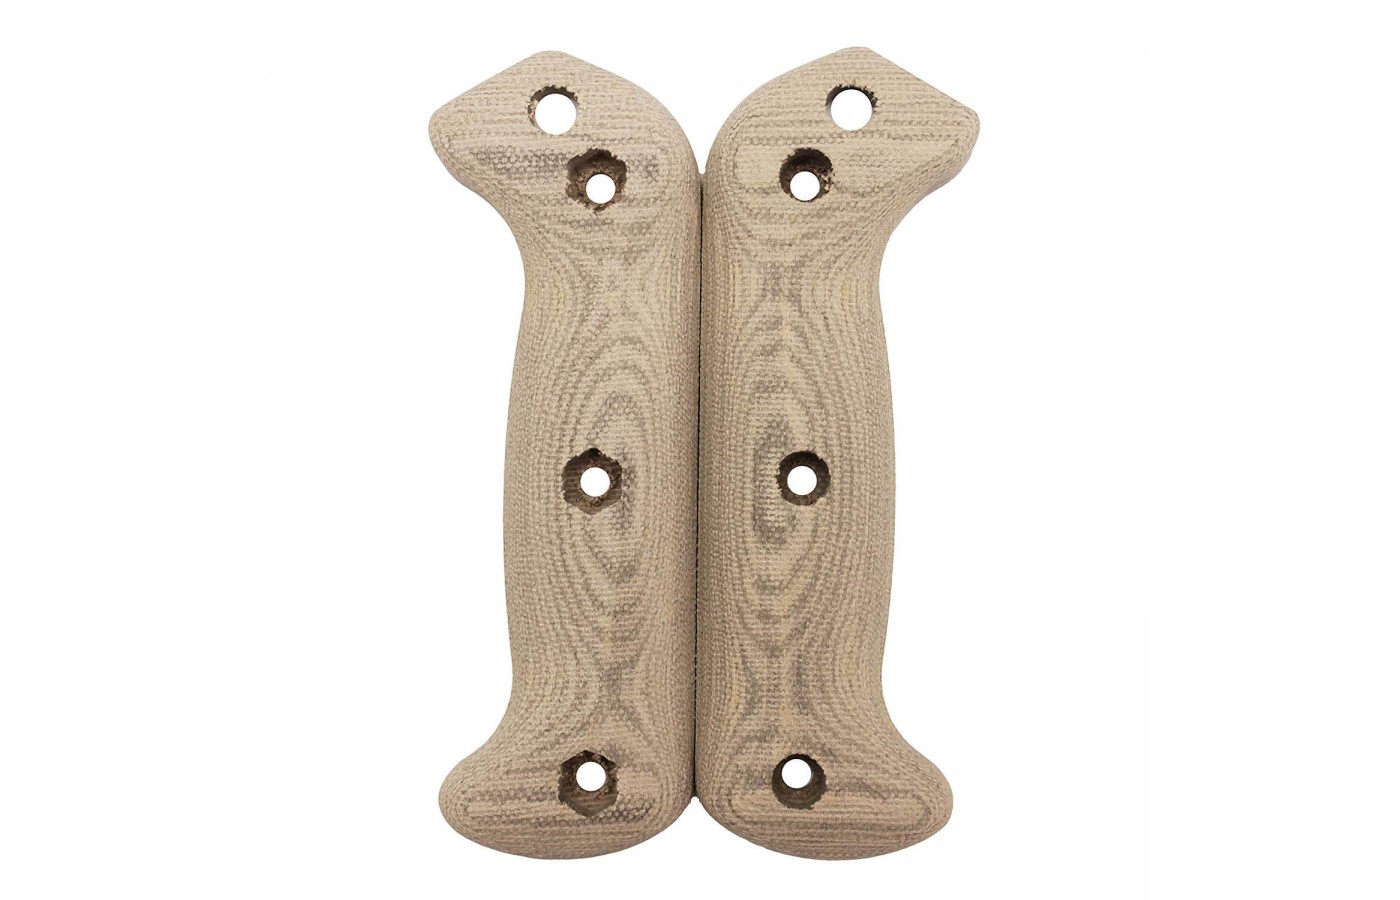 The Micarta handle is available for those who prefer a handle with more texture.